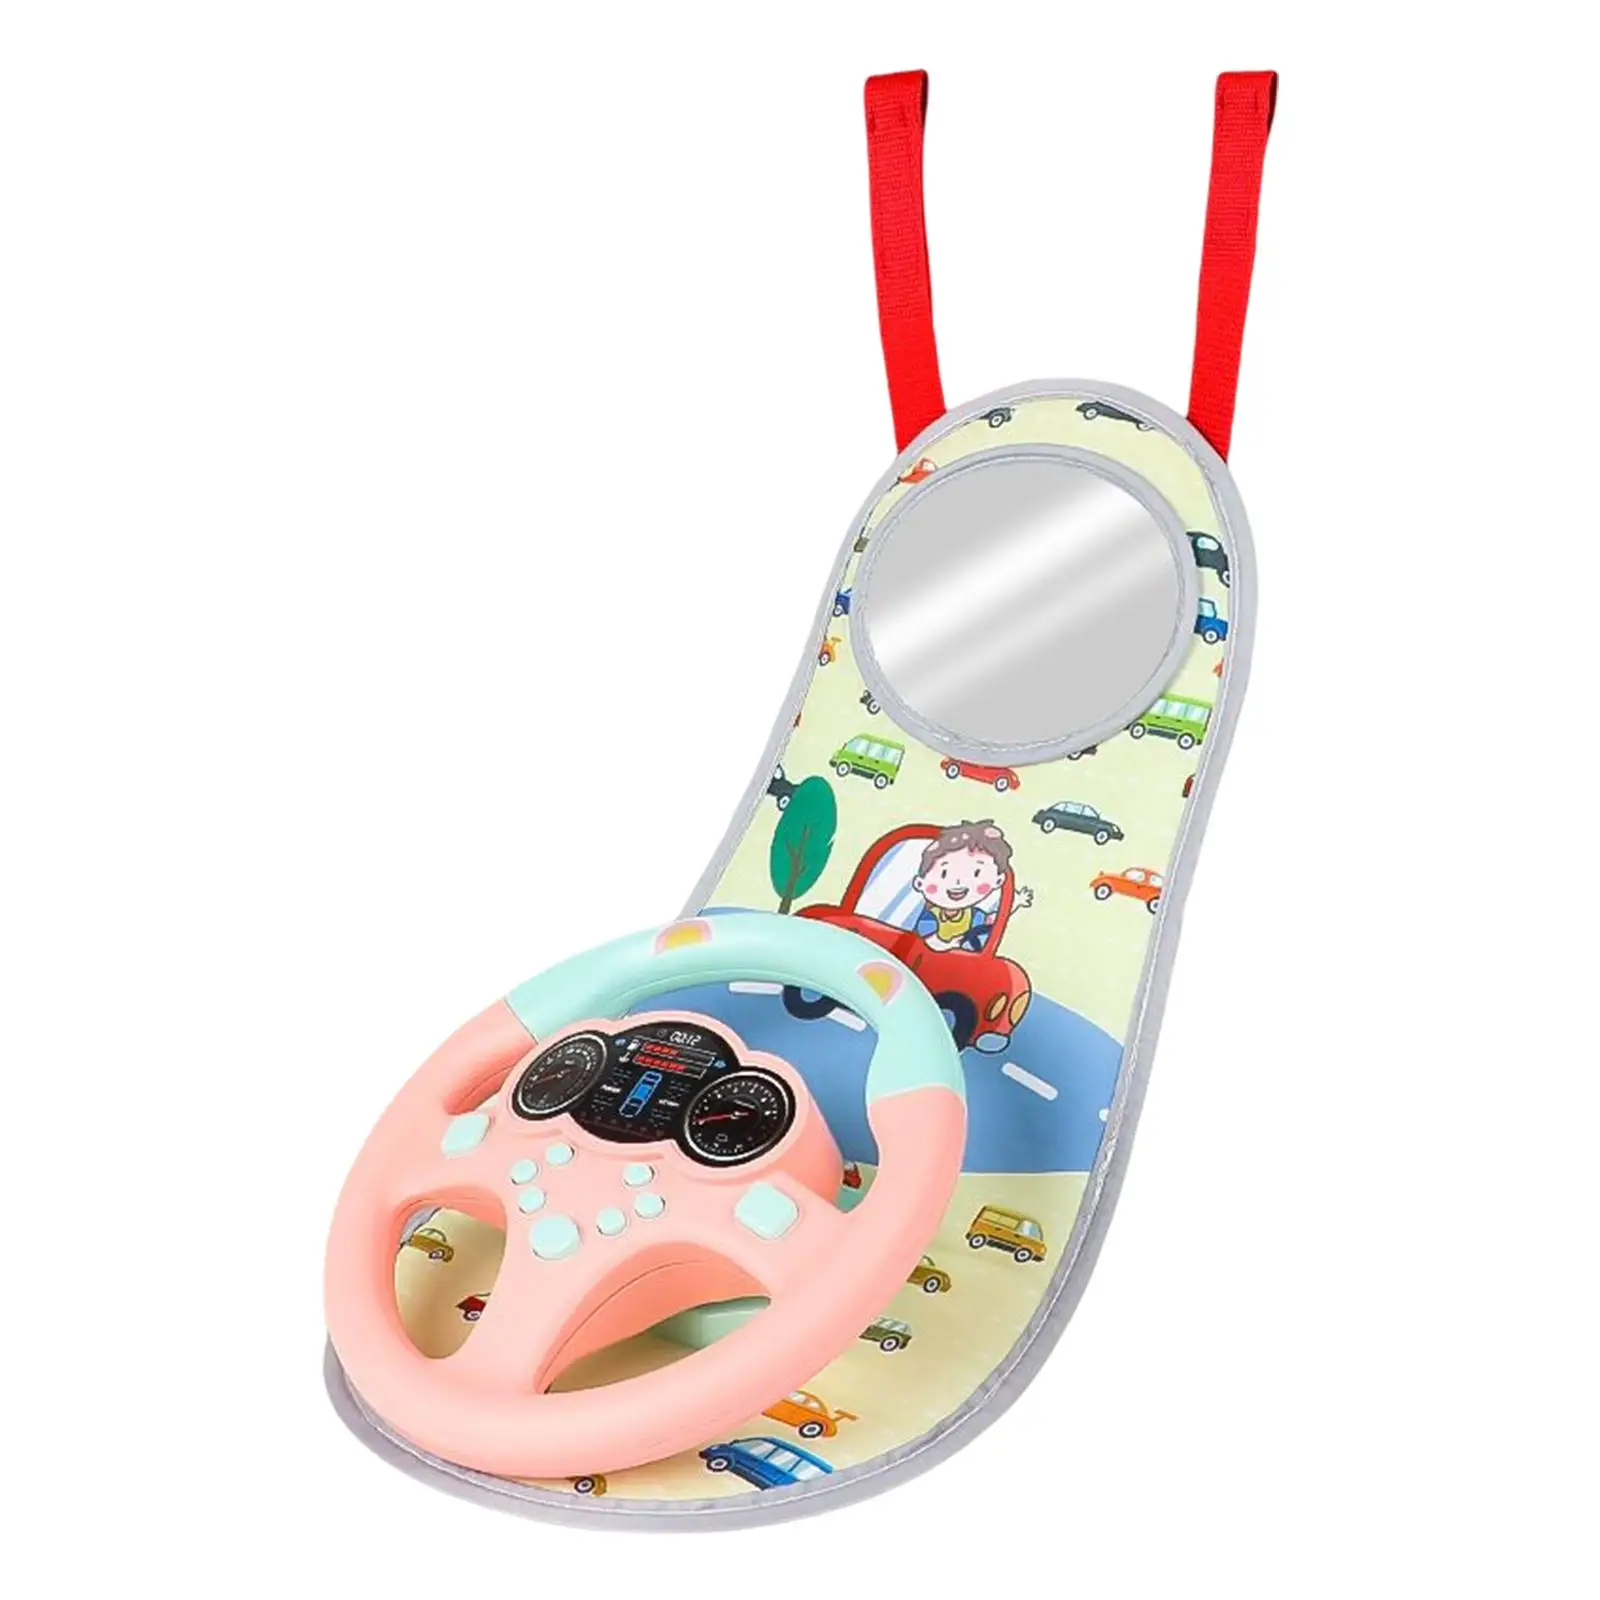 Simulation Car Seat Toys with Mirror for Kids Girls Boys Birthday Gifts